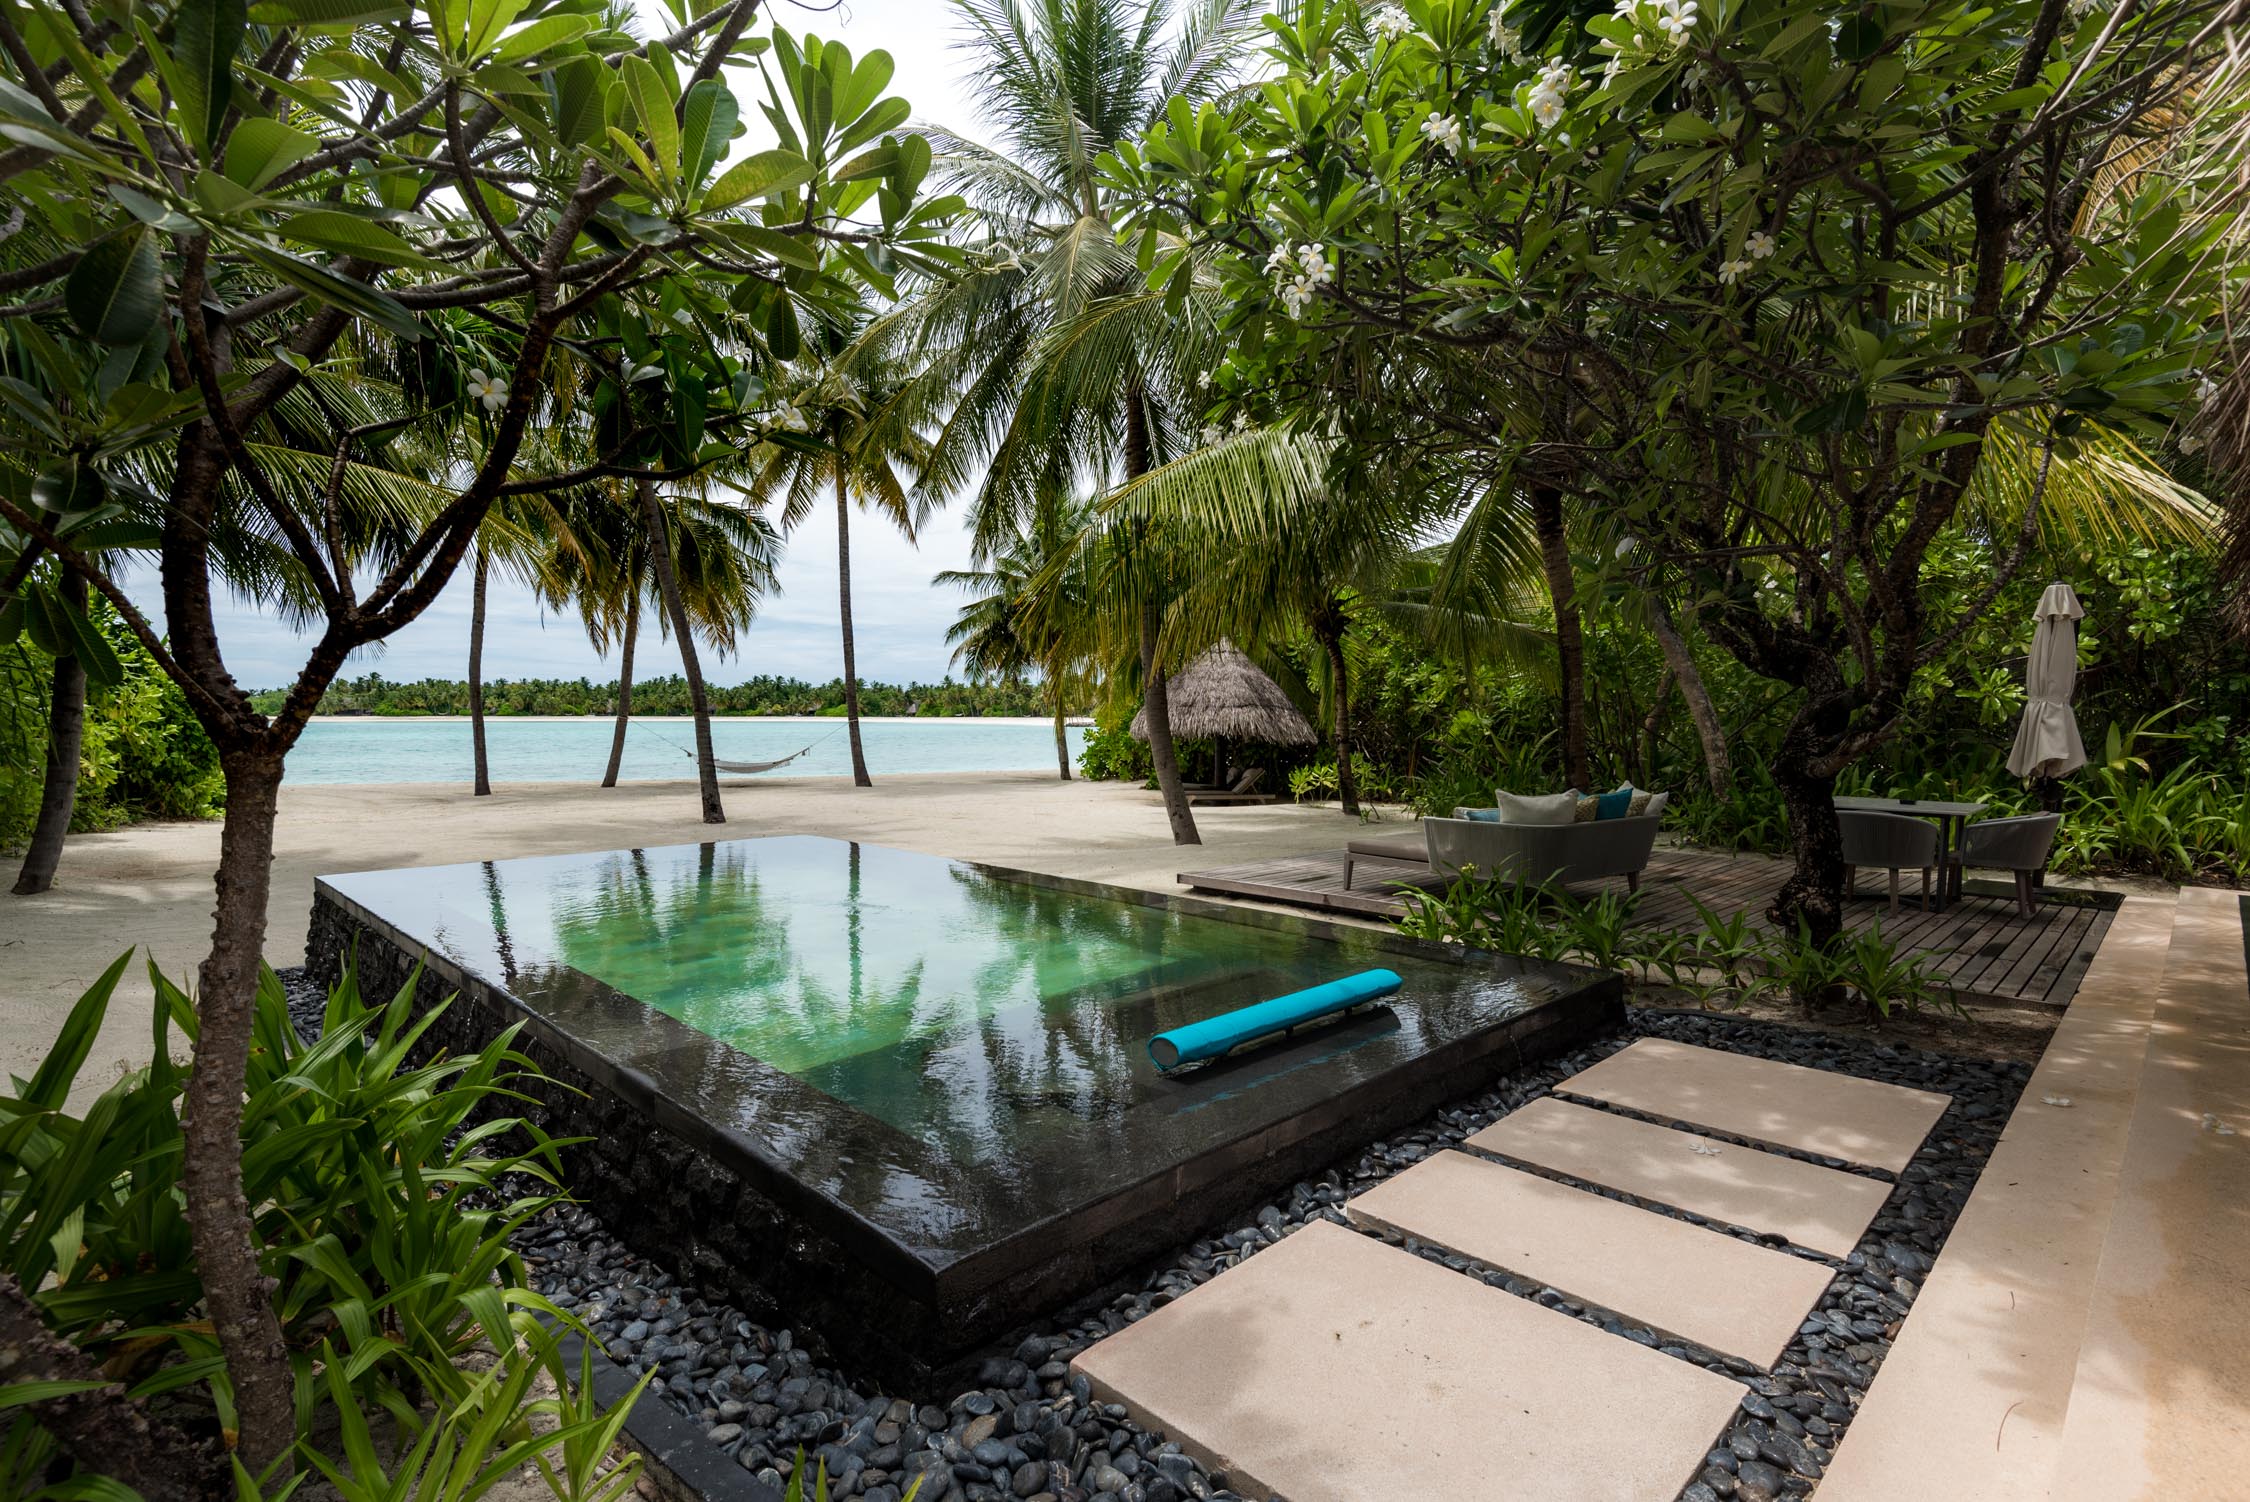  Luxury Hotels   One&amp;Only Reethi Rah: The Ultimate Maldives Luxury Resort    Read Our Review  